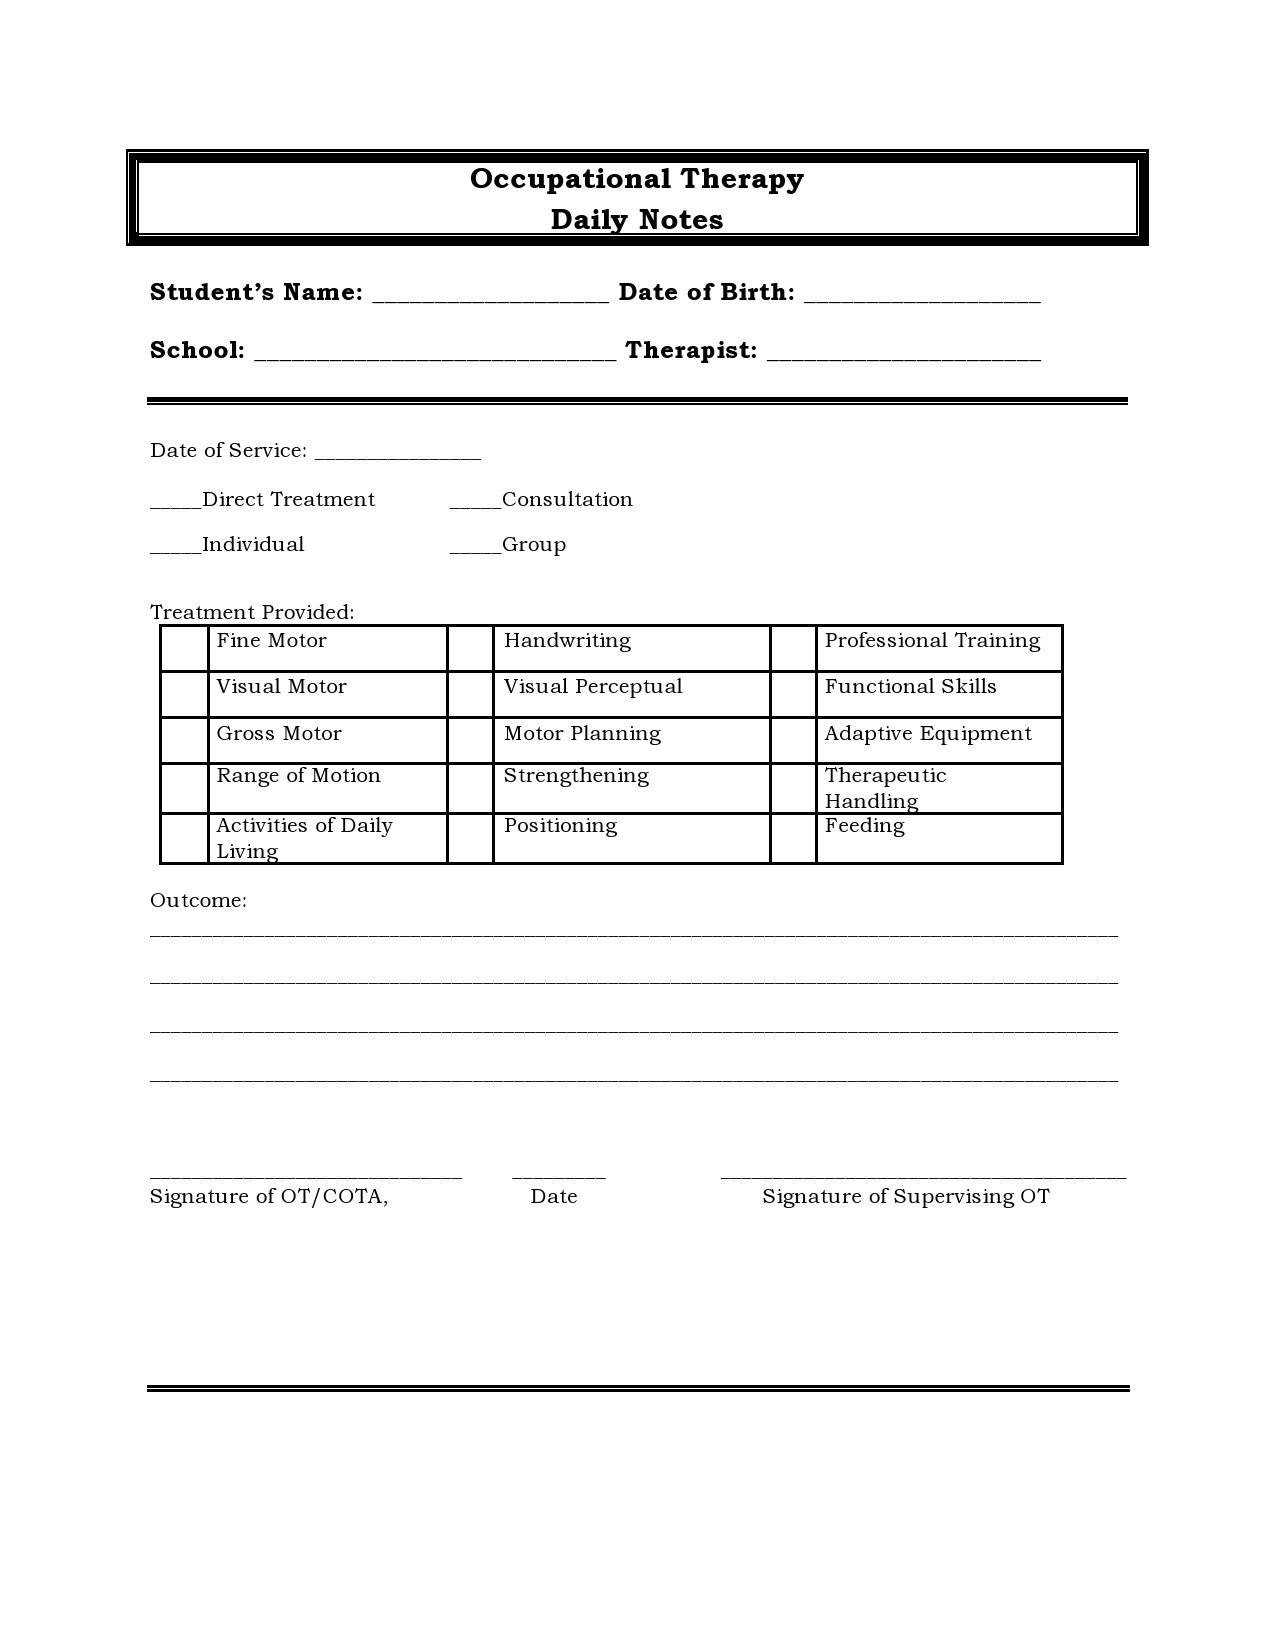 Free therapy notes template 02